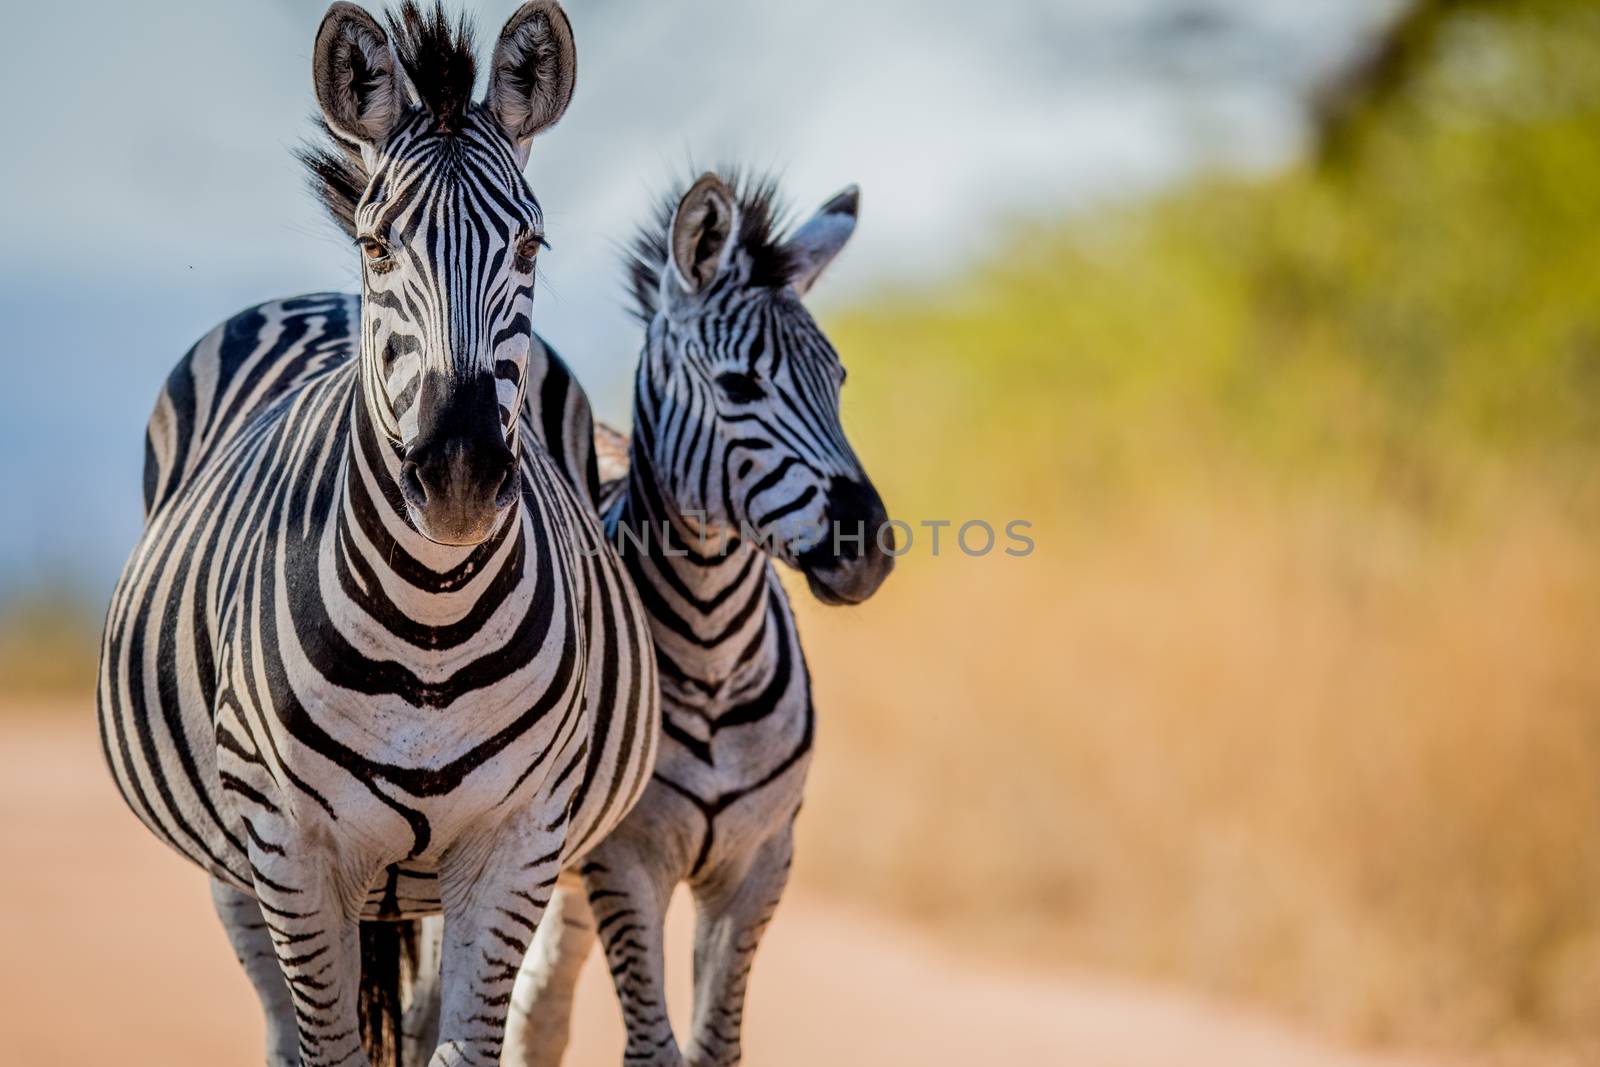 Two Zebras bonding in the Kruger. by Simoneemanphotography